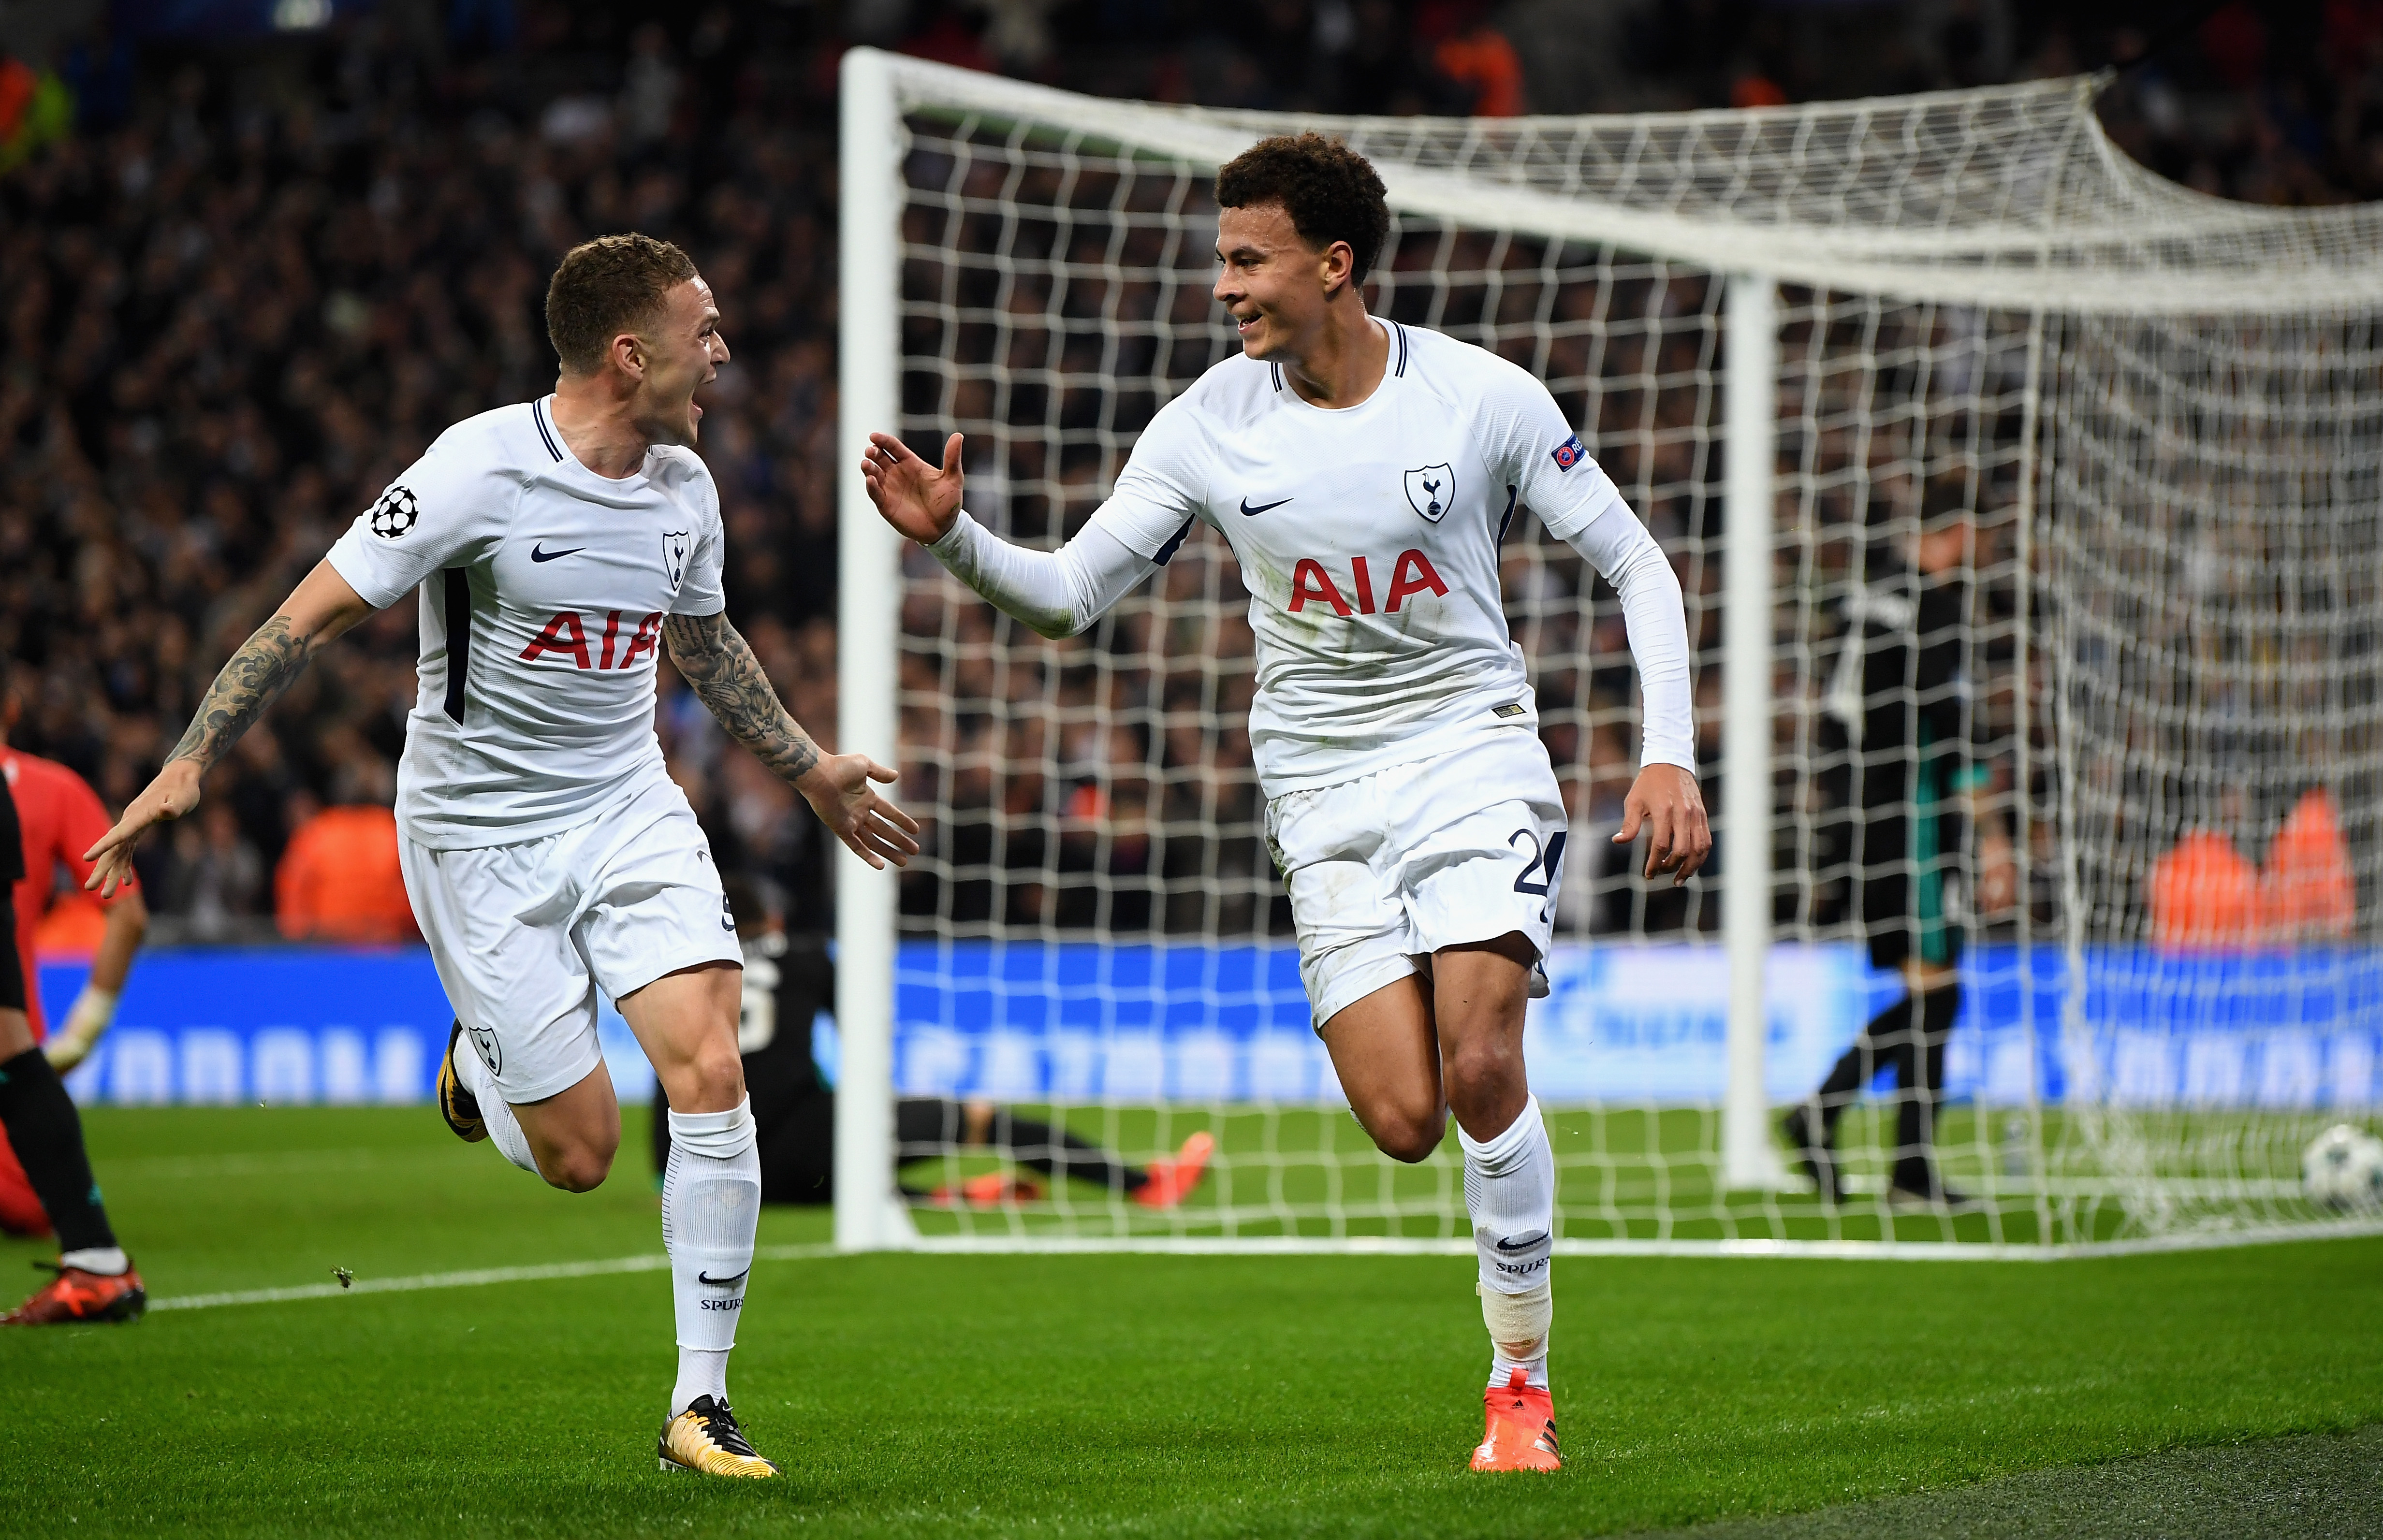 Dele Alli celebrates with Kieran Trippier after scoring against Real Madrid at Wembley in 2017.